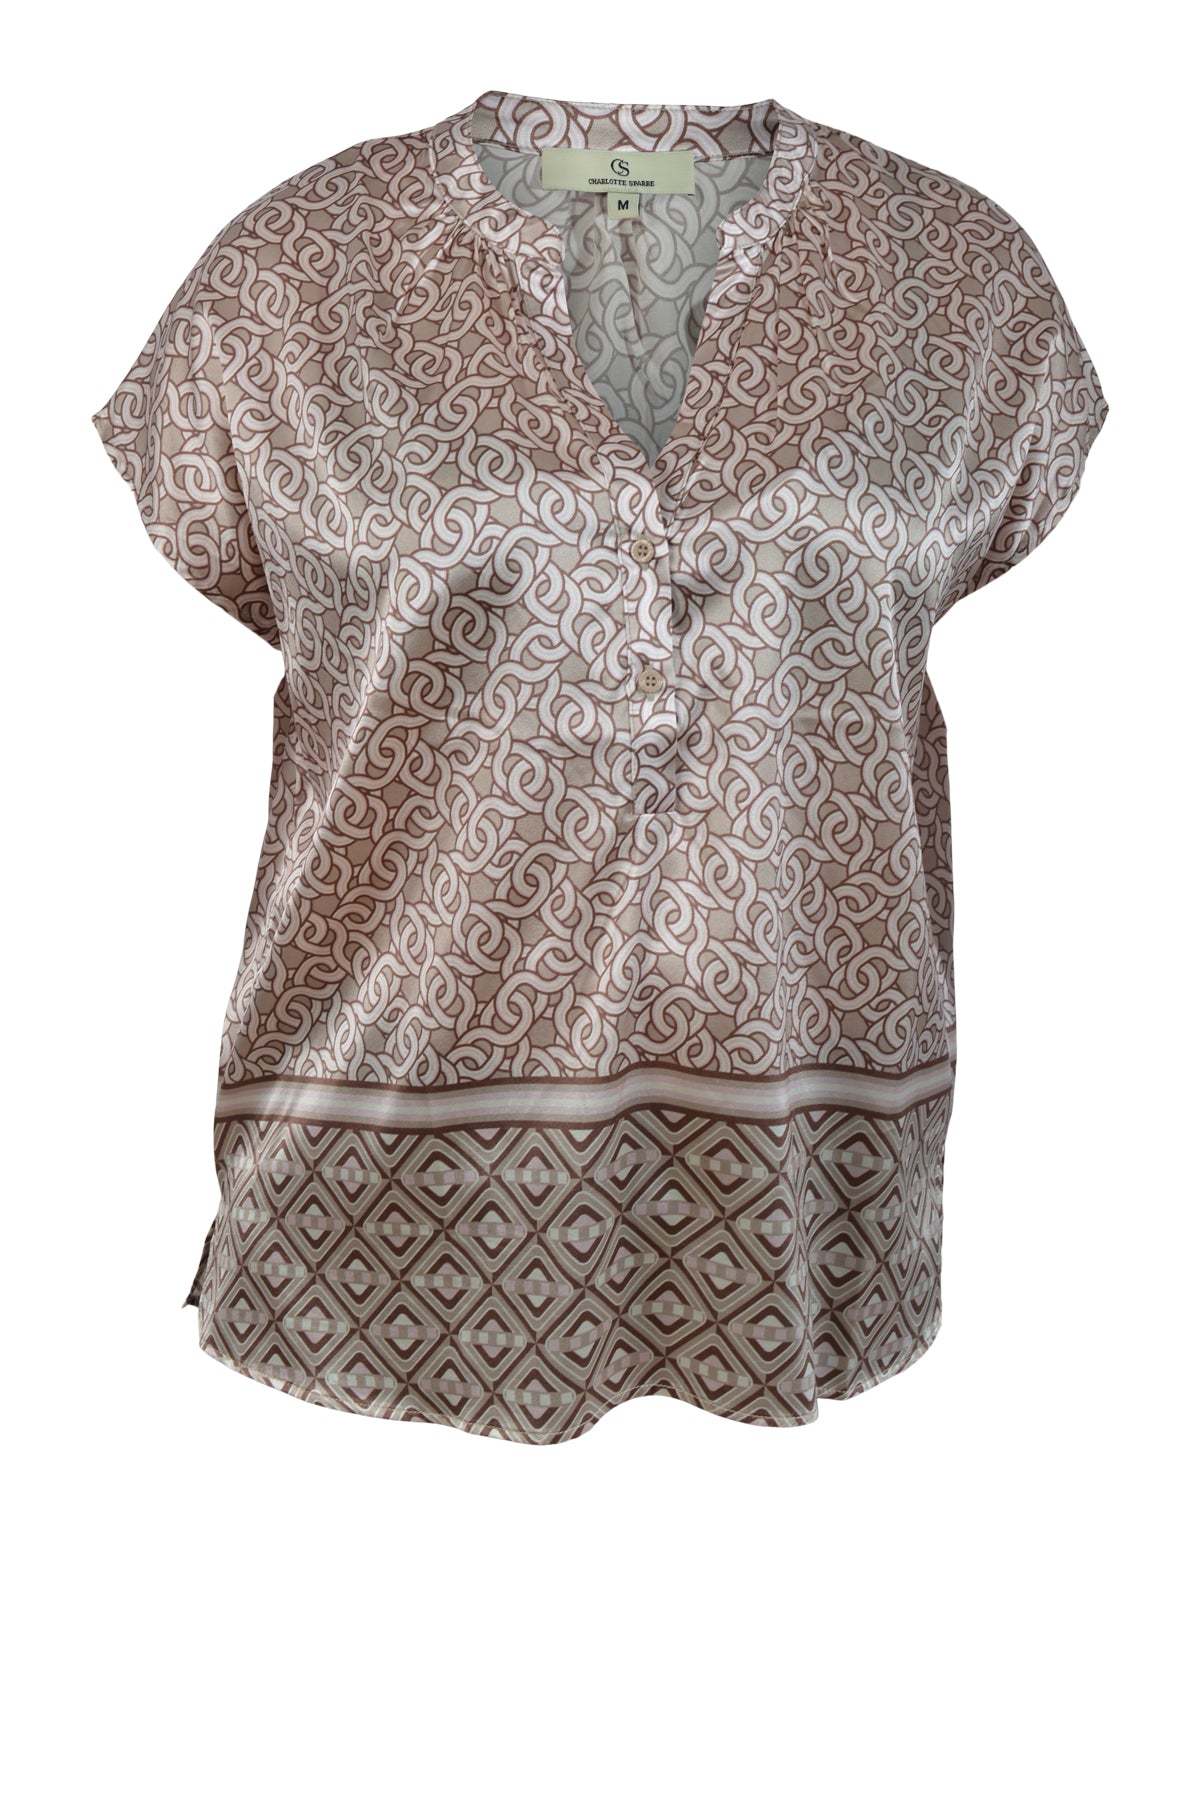 Charlotte Sparre  Top Top 2940, Chainy Taupe